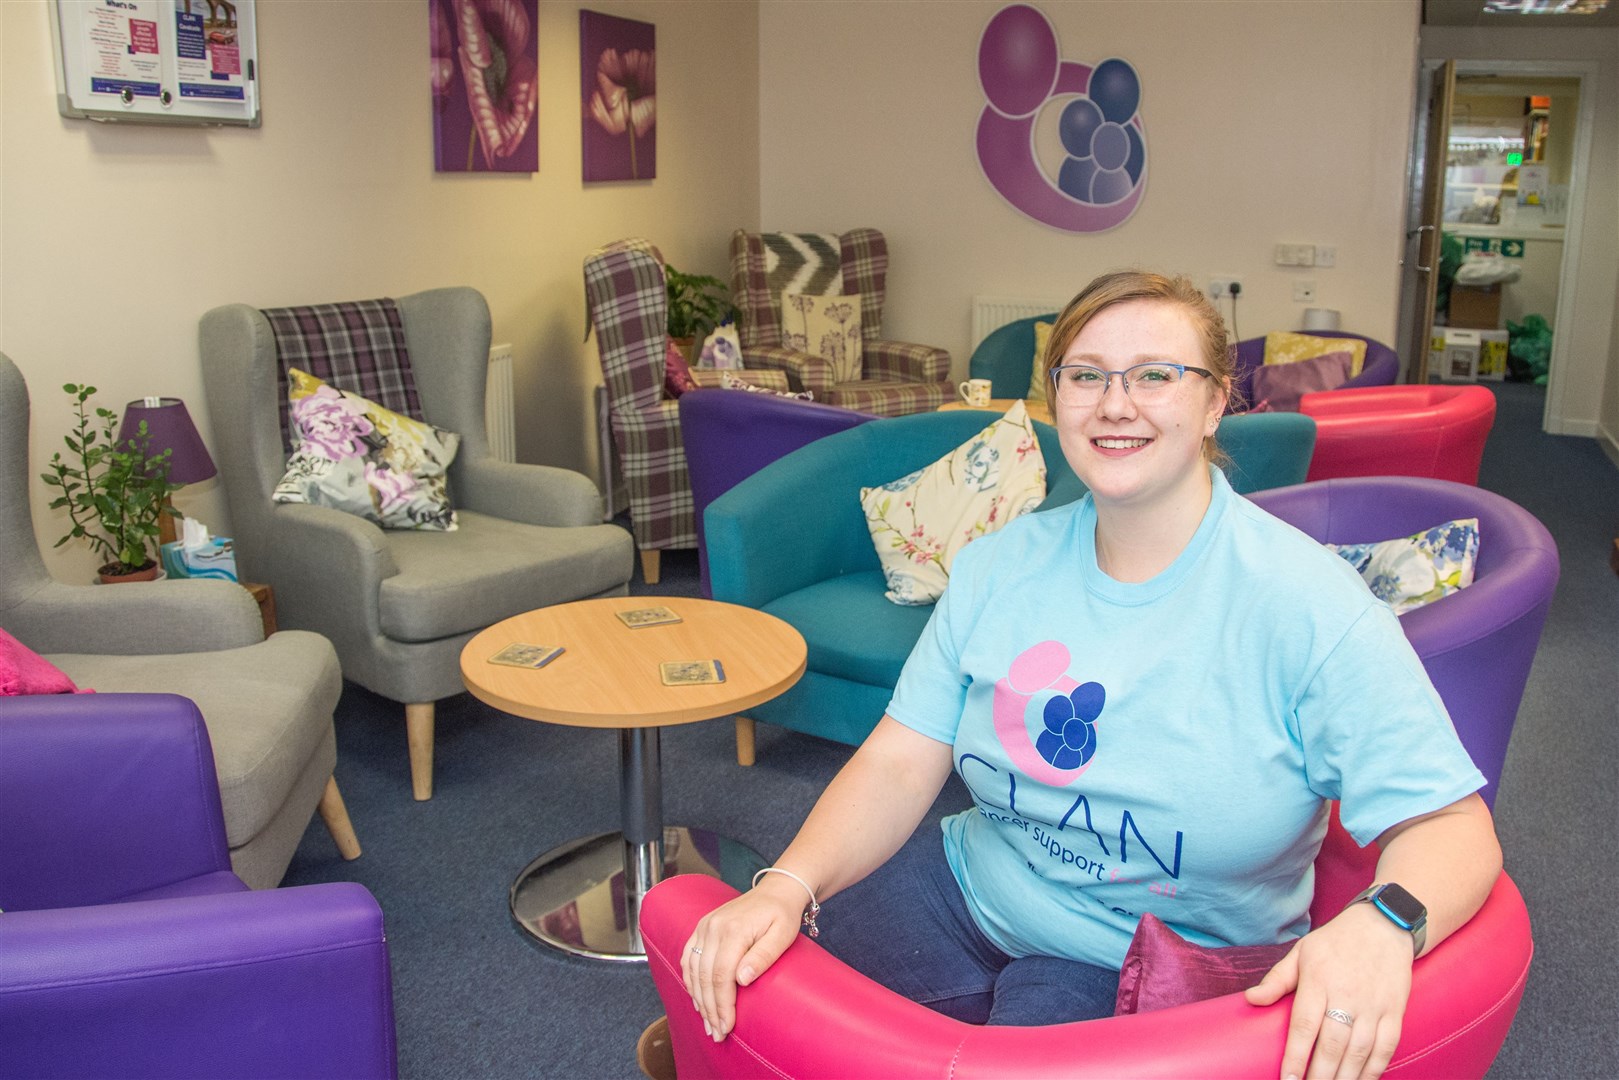 Visiting the CLAN centre in Elgin is Rhiannon Robinson, who is undertaking a 300ft bungee jump in aid of the cancer charity. Picture: Becky Saunderson.